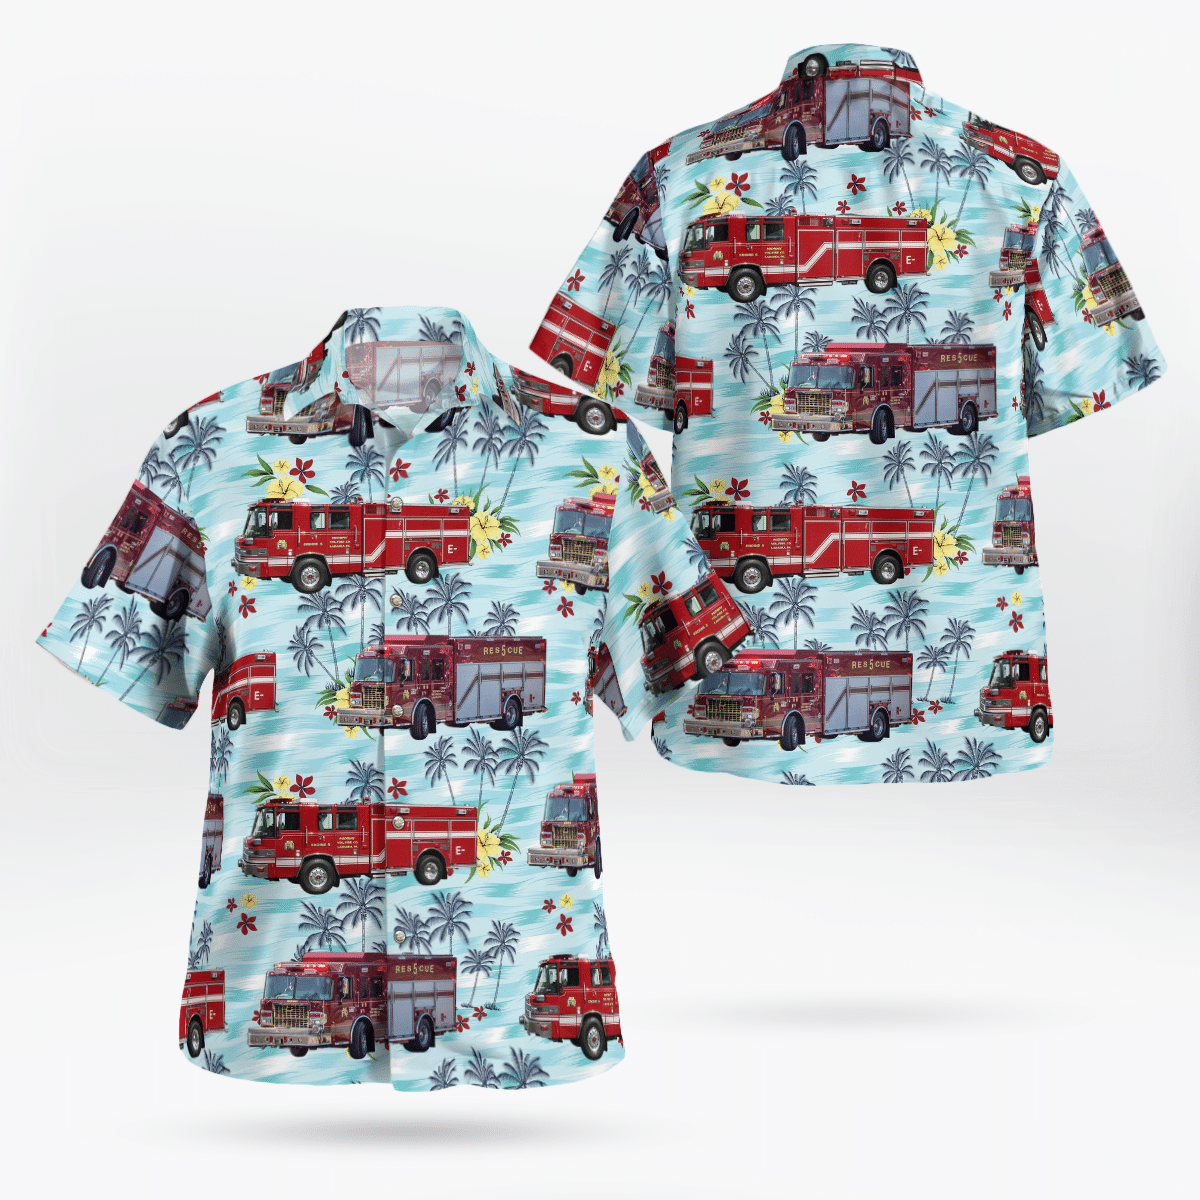 Shop now to find the perfect Hawaii Shirt for your hobby 99